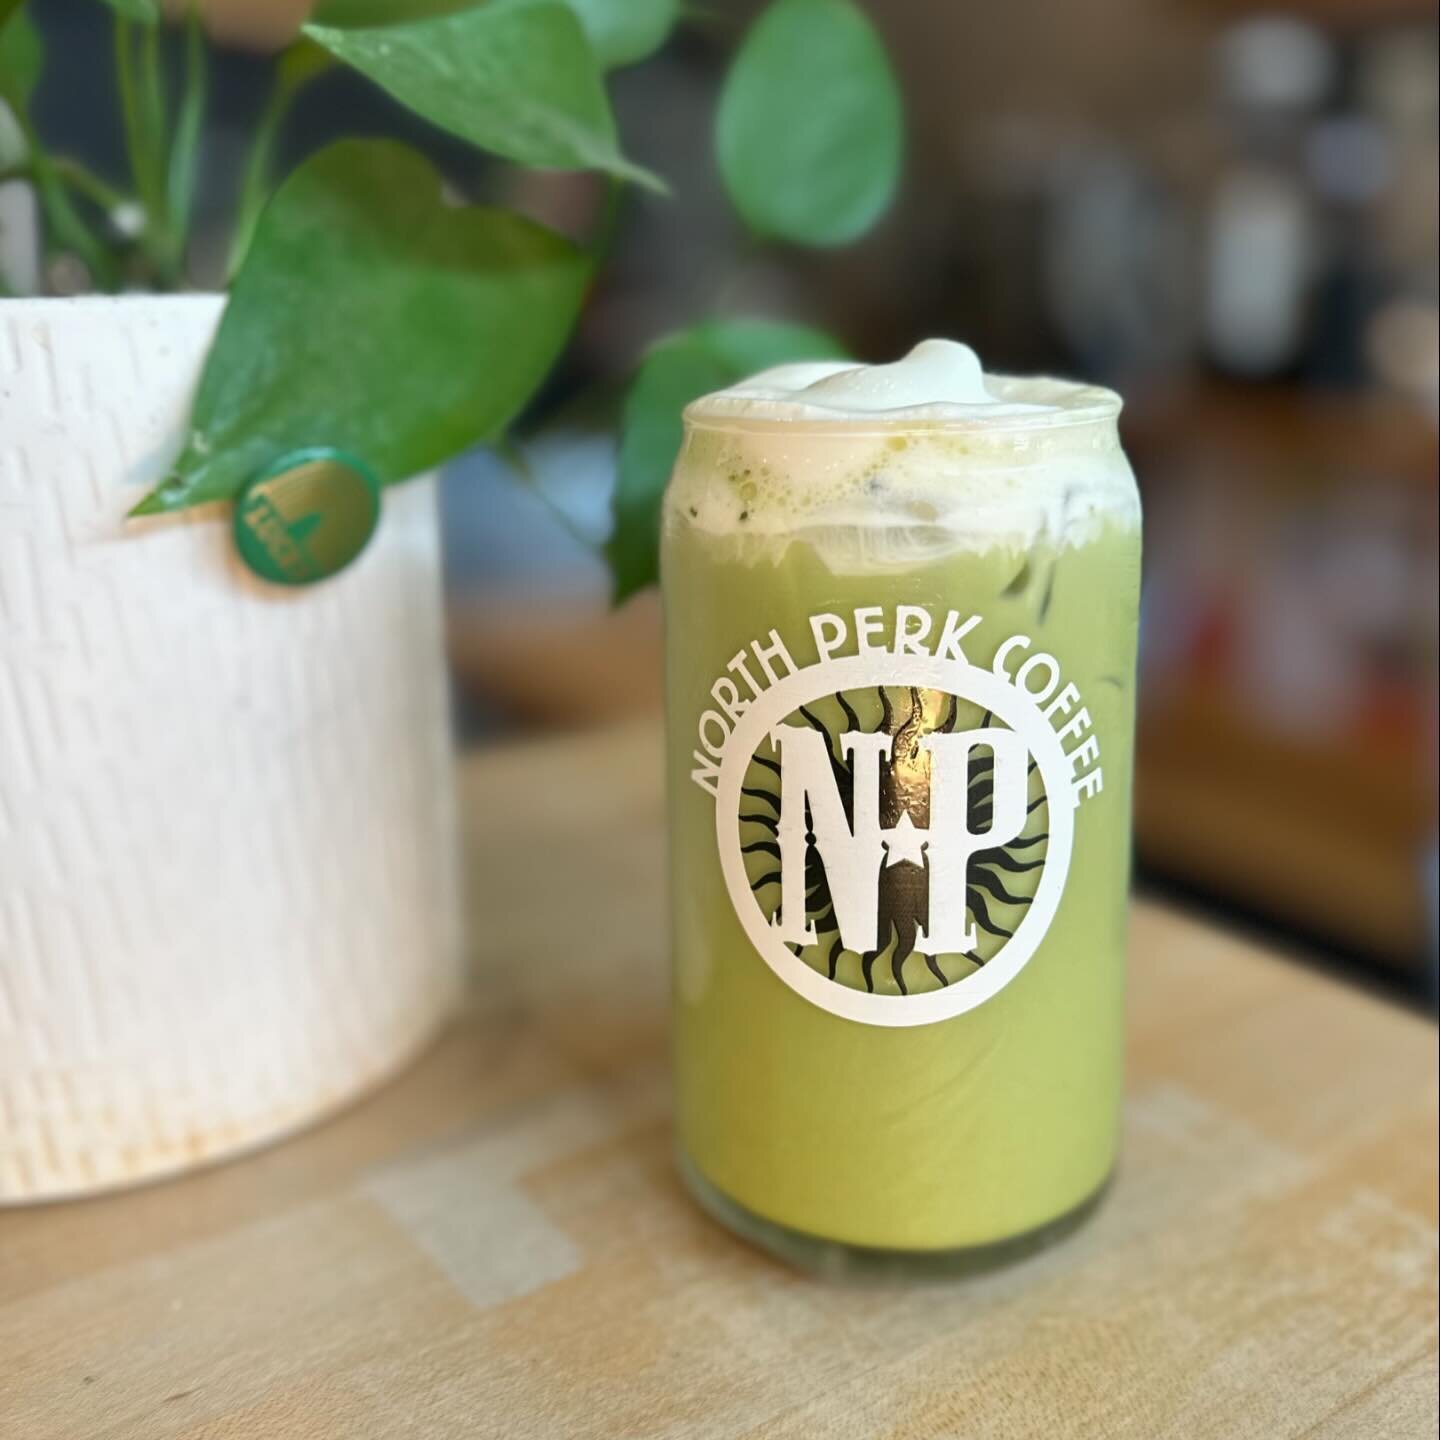 St. Patrick&rsquo;s festivities call for our Matcha with Irish Cream&hellip; Cheers ☘️☘️☘️

🪻Spring Specials drop next week ! 

@northperkcoffee @downtownpetoskey @petoskeyarea #northperkcoffee #matchalatte #organic #matchalover #greenvibes #lattear